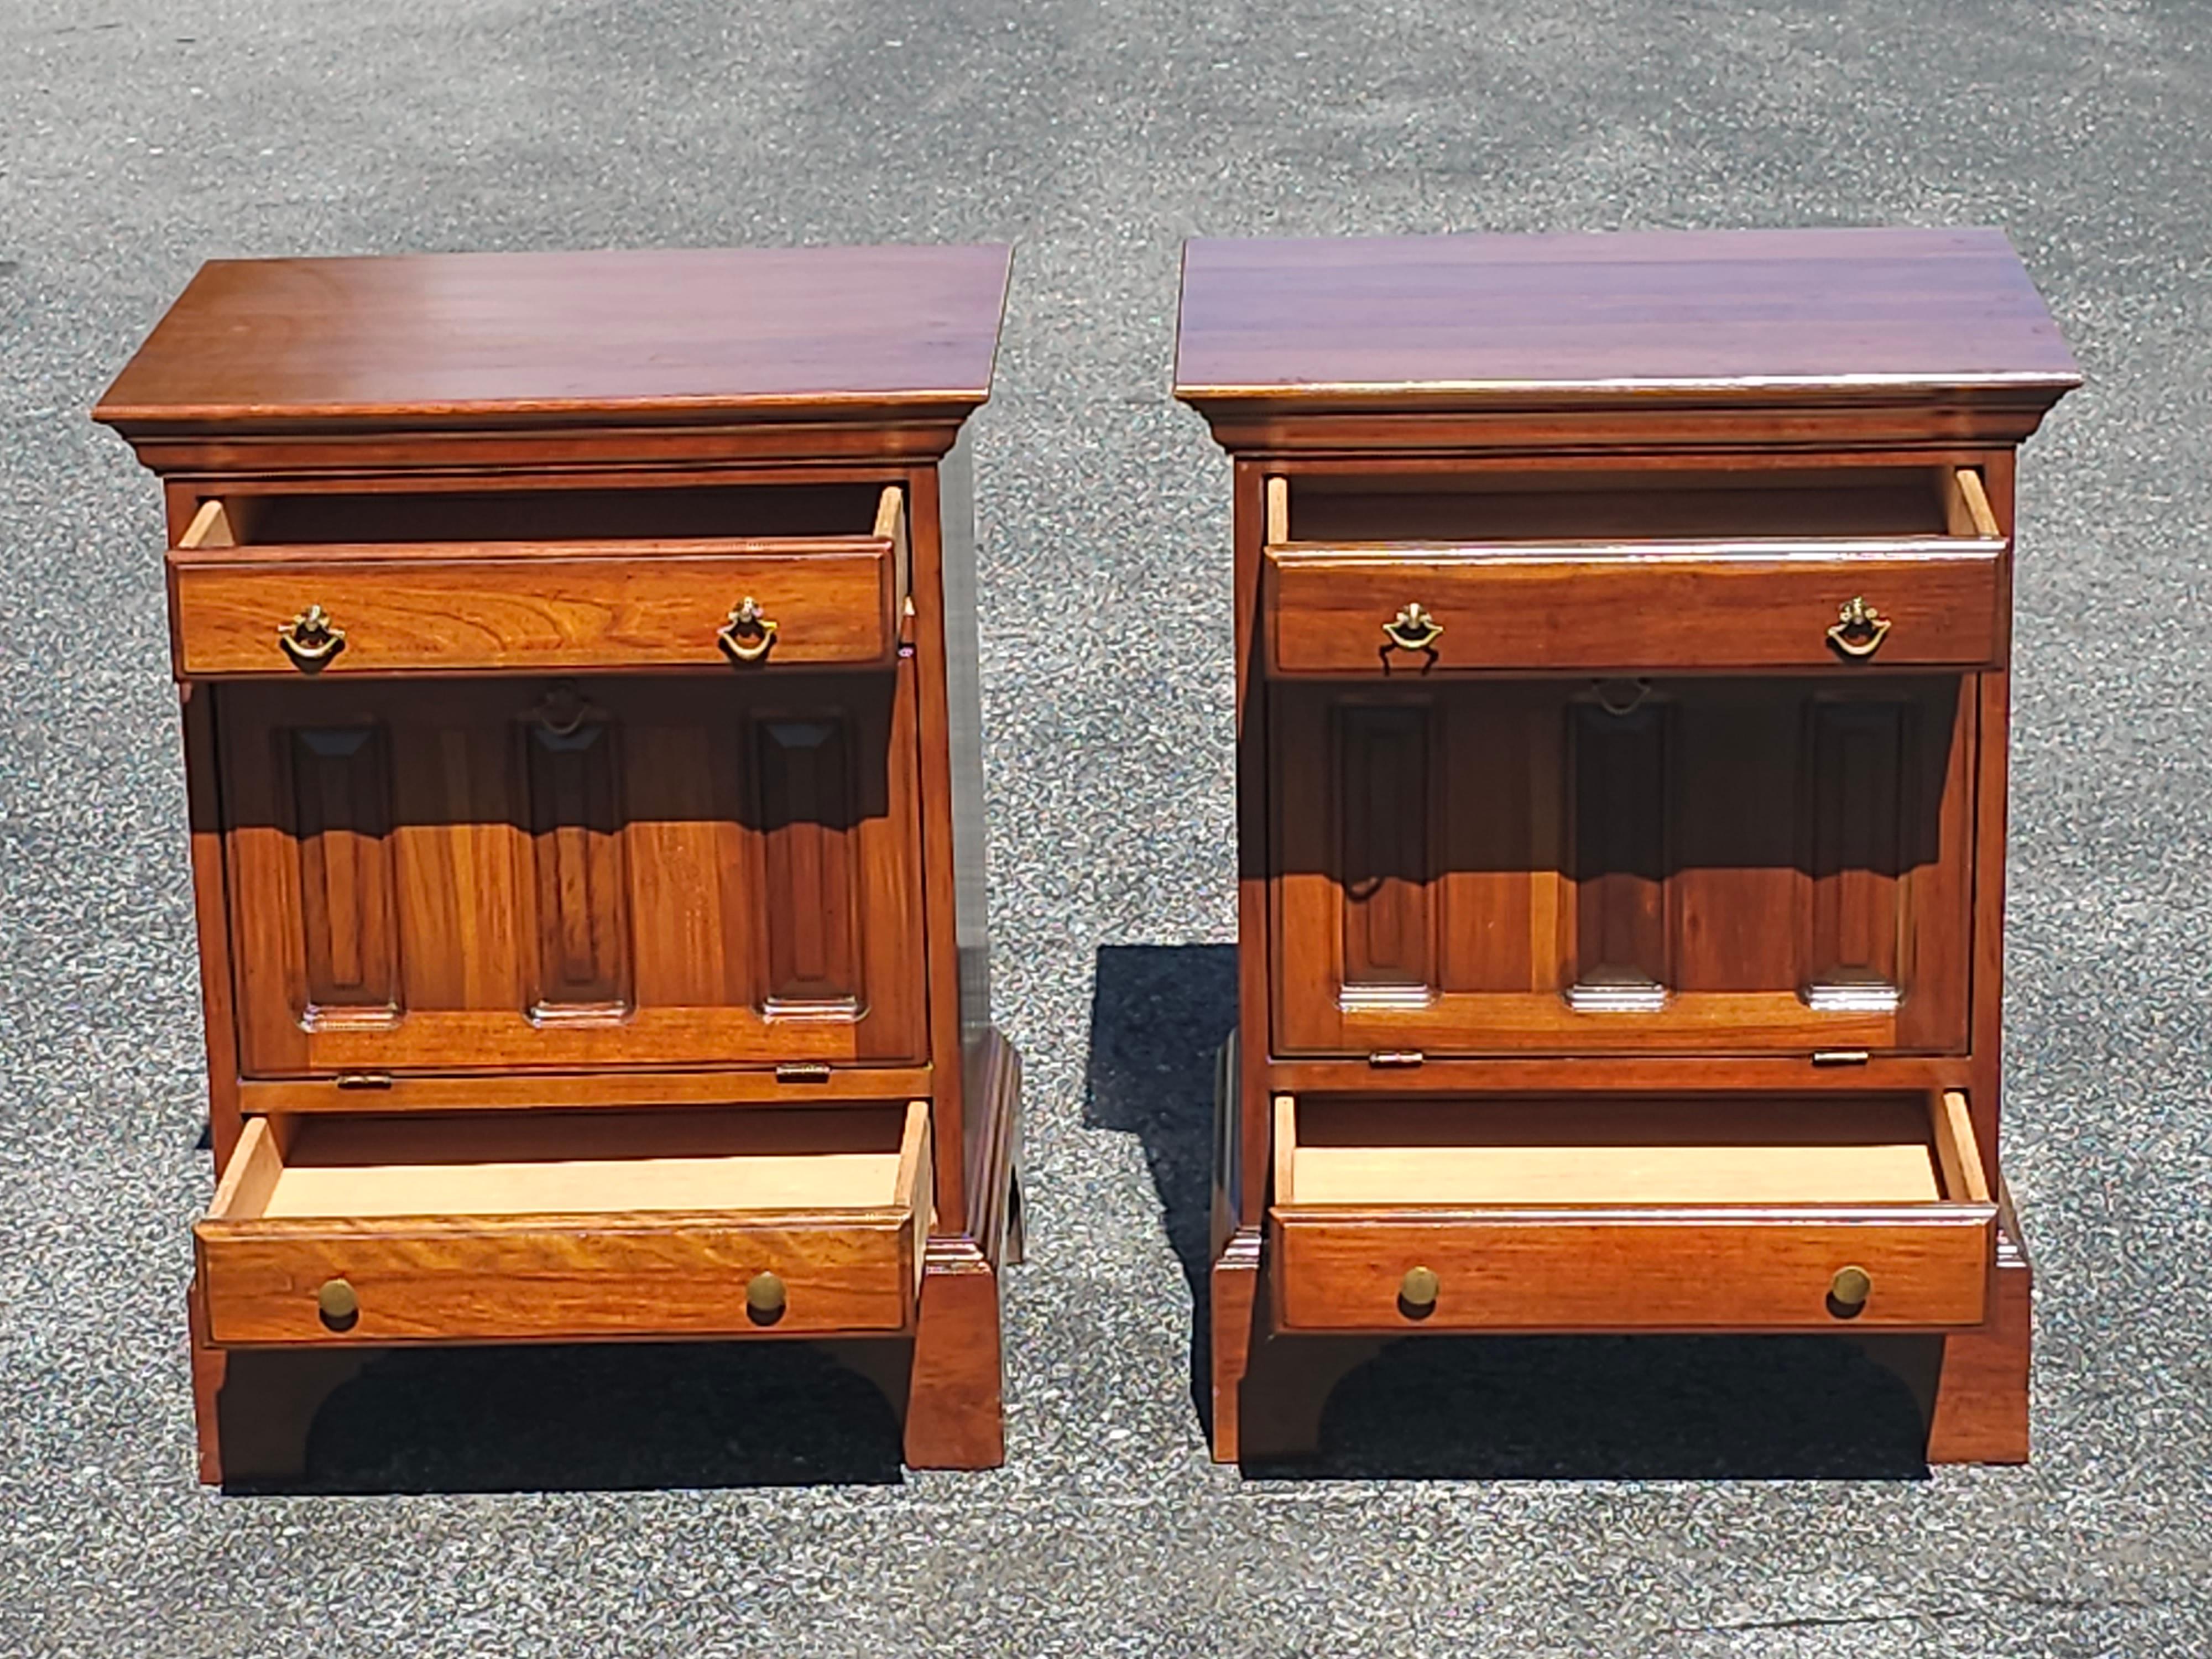 20th Century David Cabinet Cherry 2-Drawer a Abattant Door Bedside Cabinets Pair For Sale 9